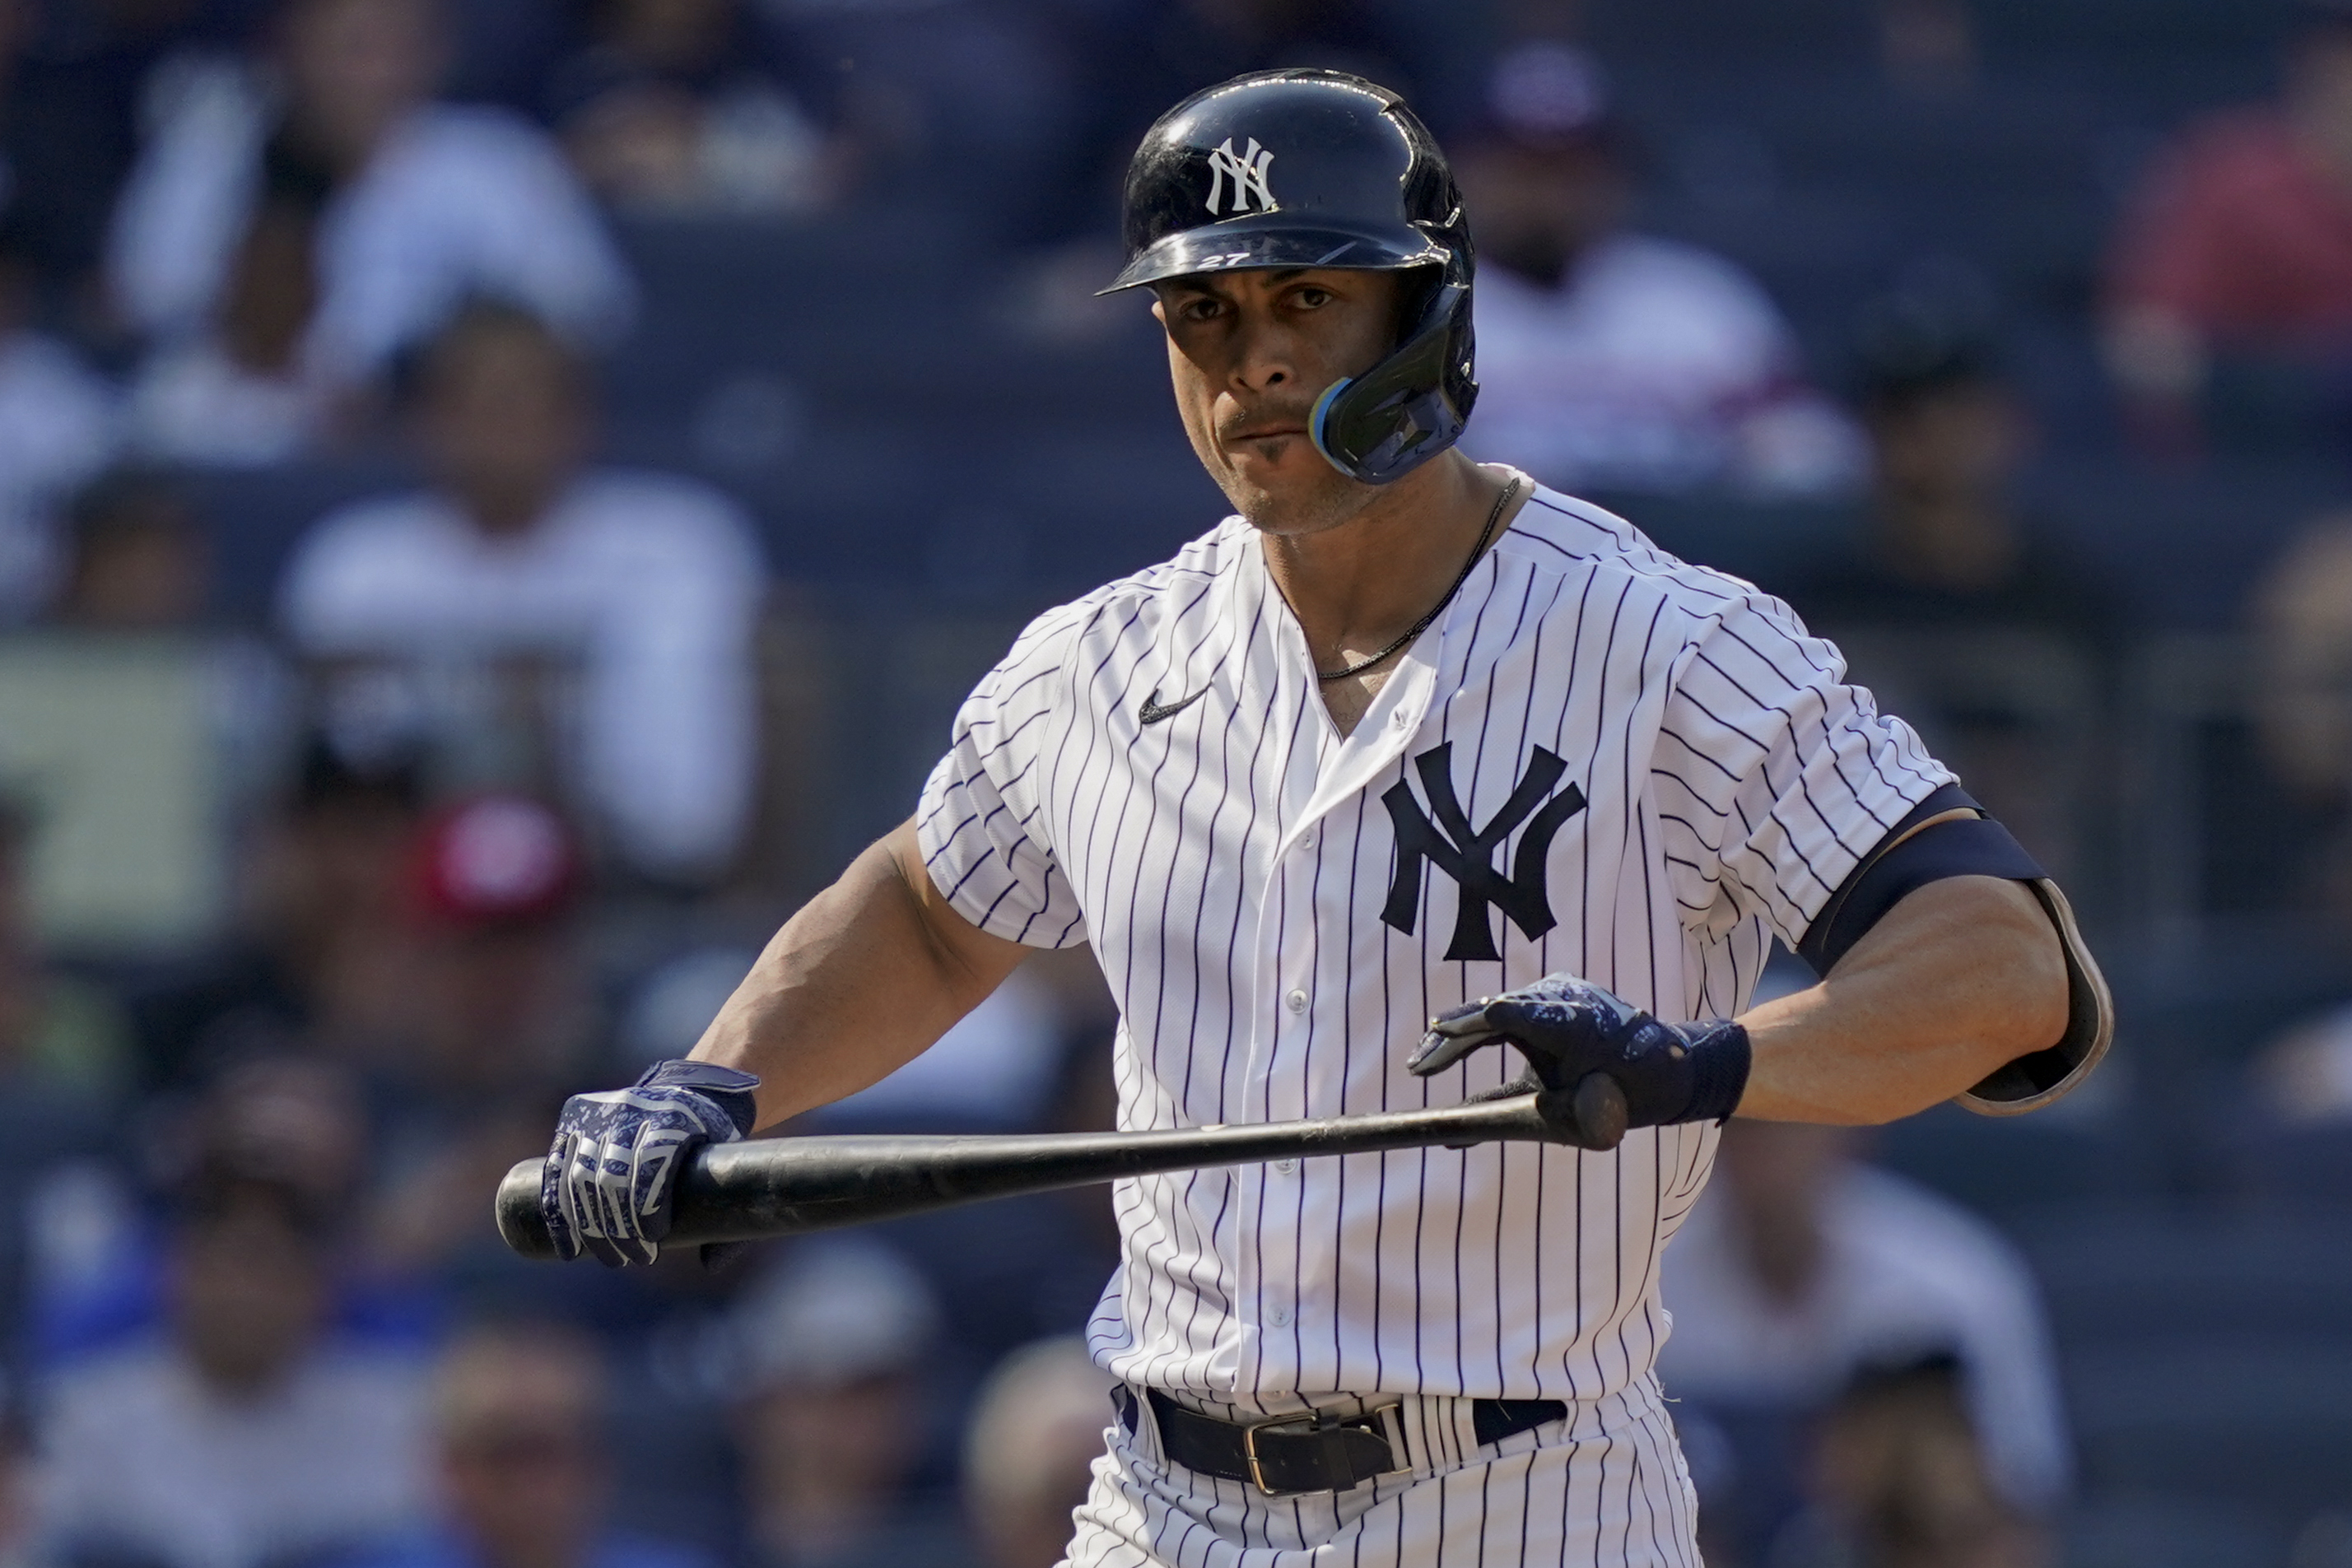 Yankees' Giancarlo Stanton exits game with calf injury